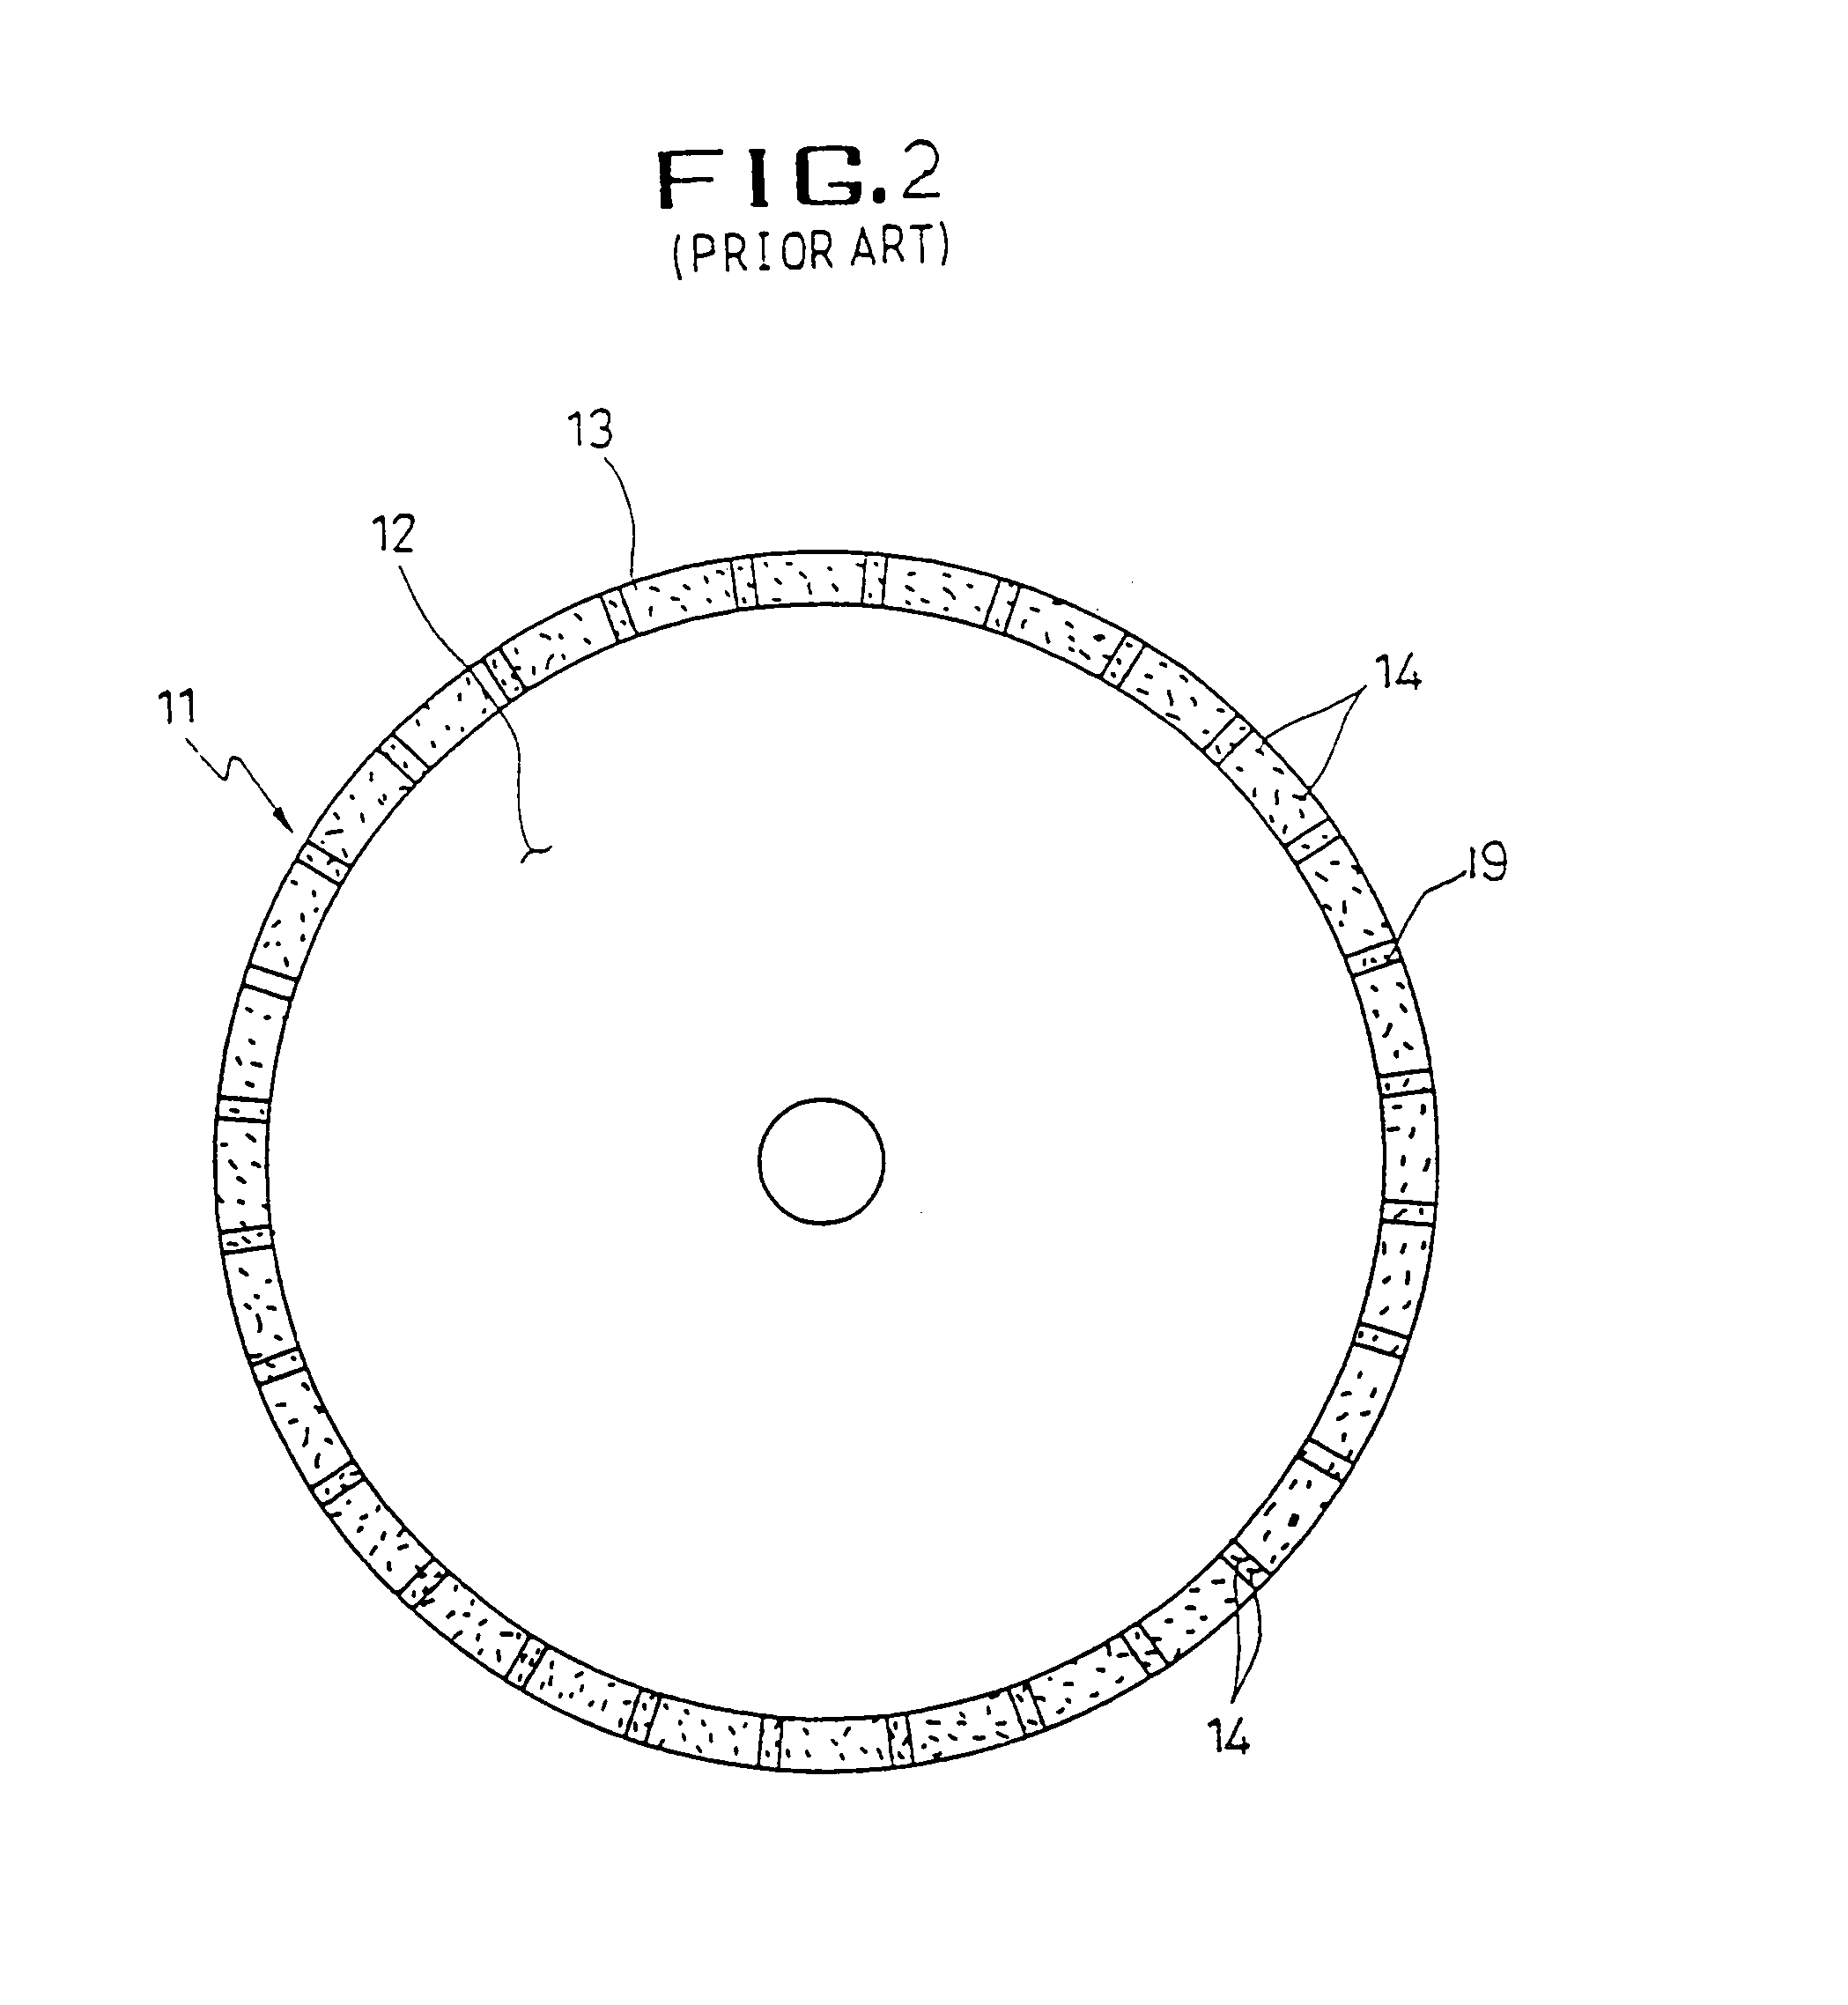 Diamond blade having rim type cutting tip for use in grinding or cutting apparatus